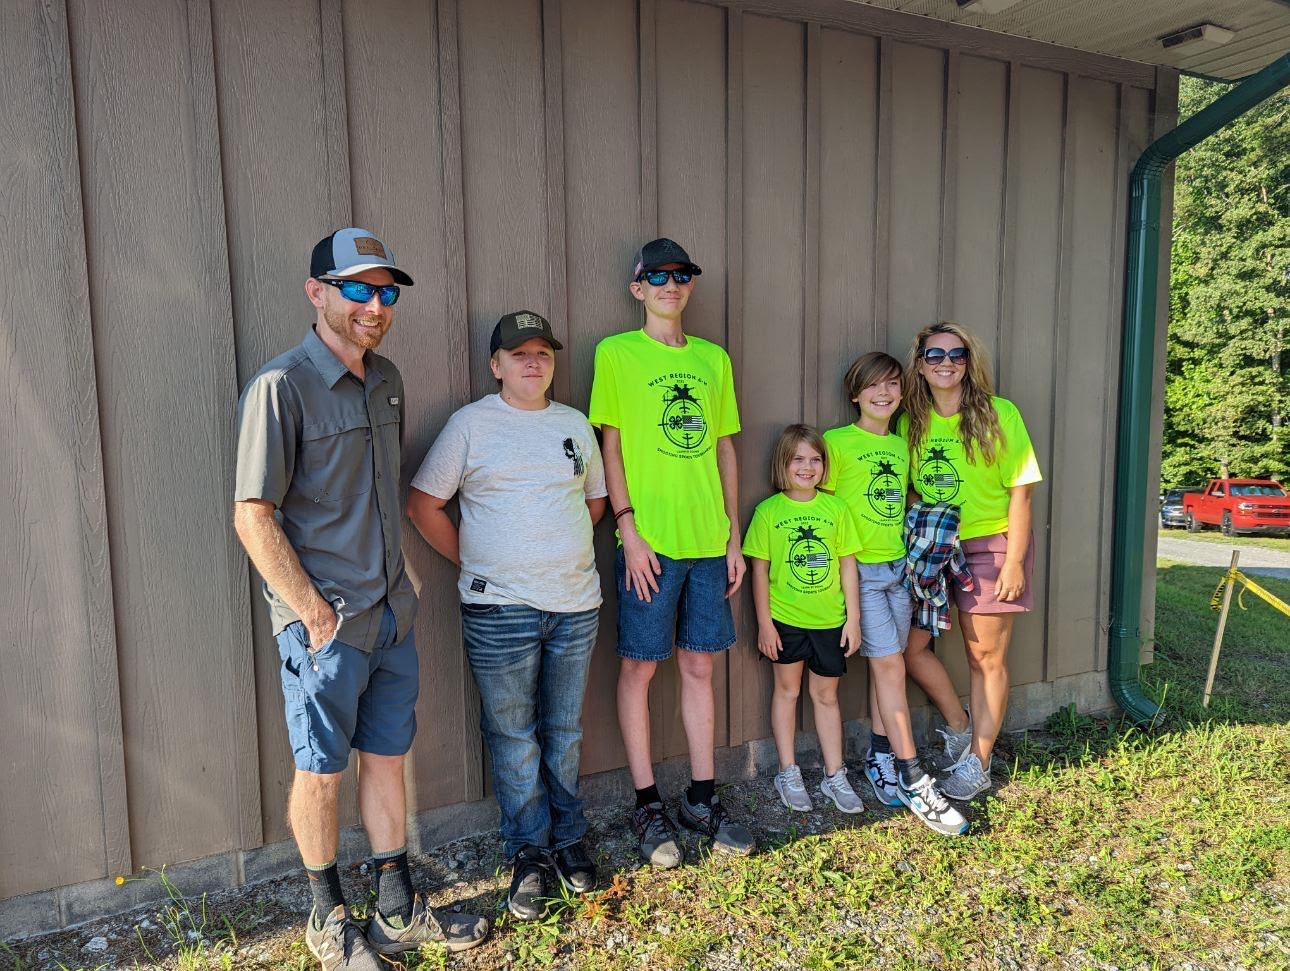 Four members of the Appalachian Aces 4-H Club pose together before competition at the West Regional 4-H Shooting Sports Tournament on August 13. From left to right stands Derrick Baker, Elijah Dillon, Jaxson Price, Cora Baker, Lawson Baker and Jennifer Baker.